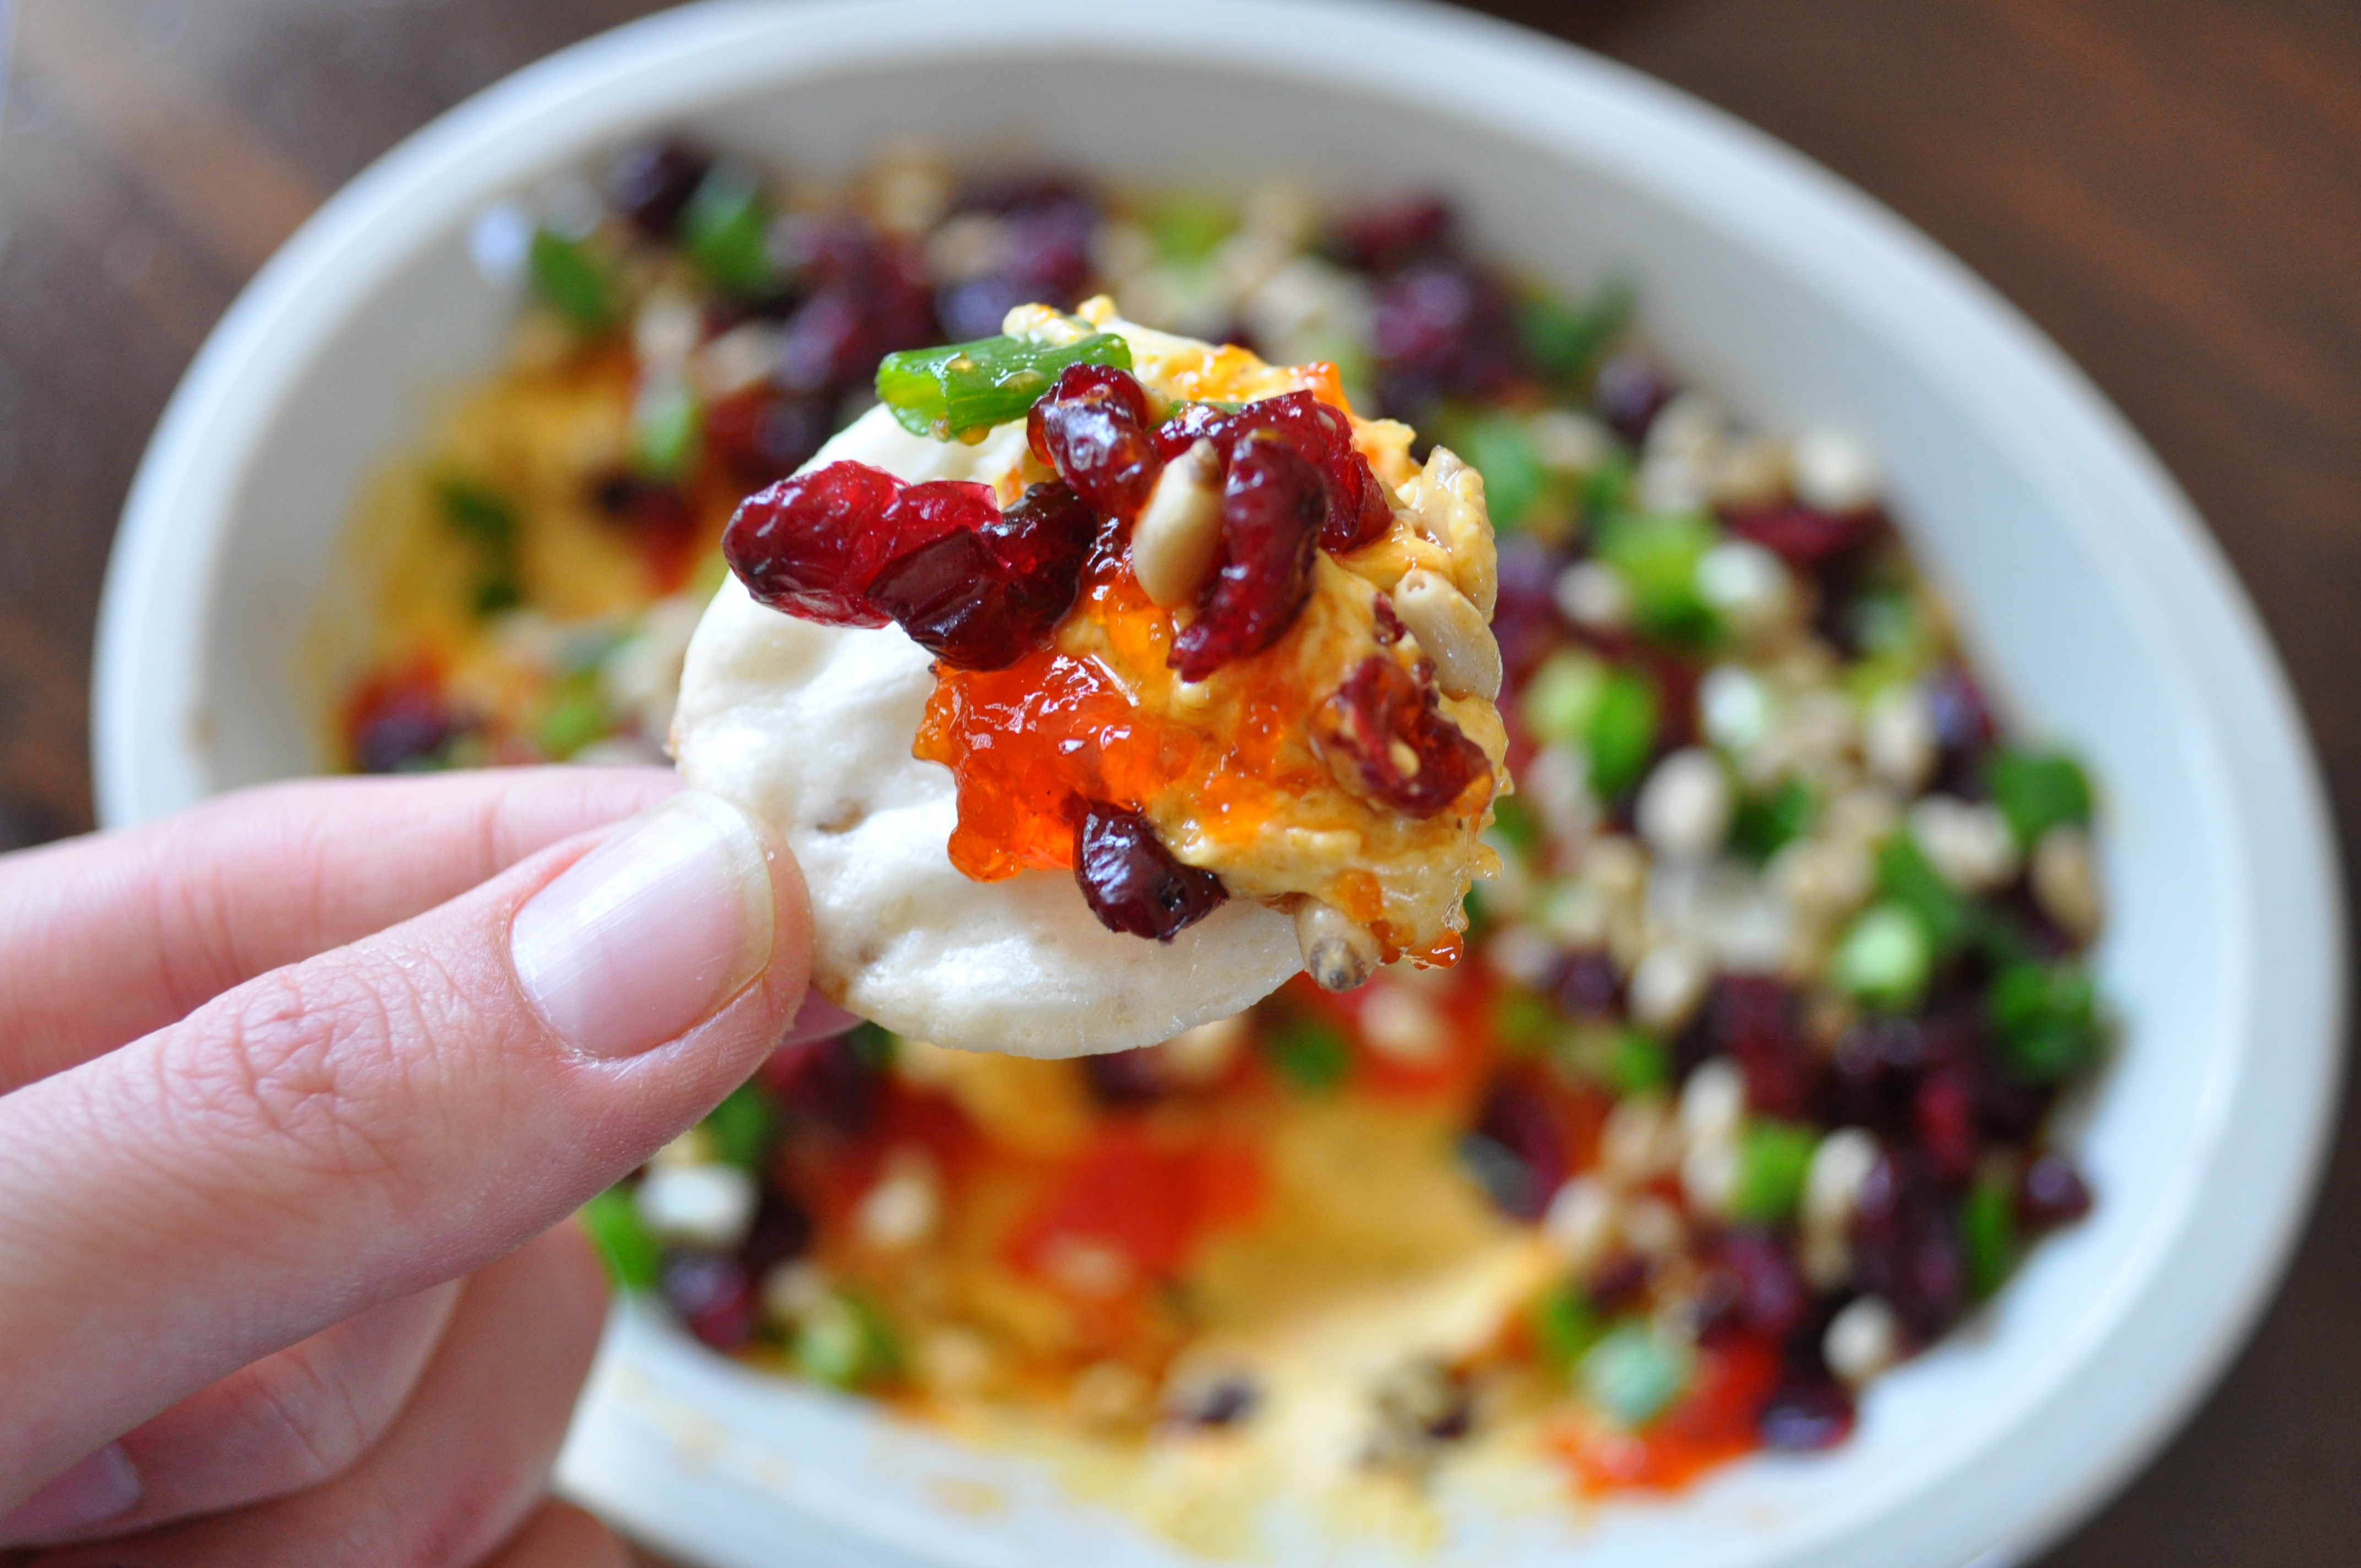 Where can you find recipes for Philly cream cheese dip?